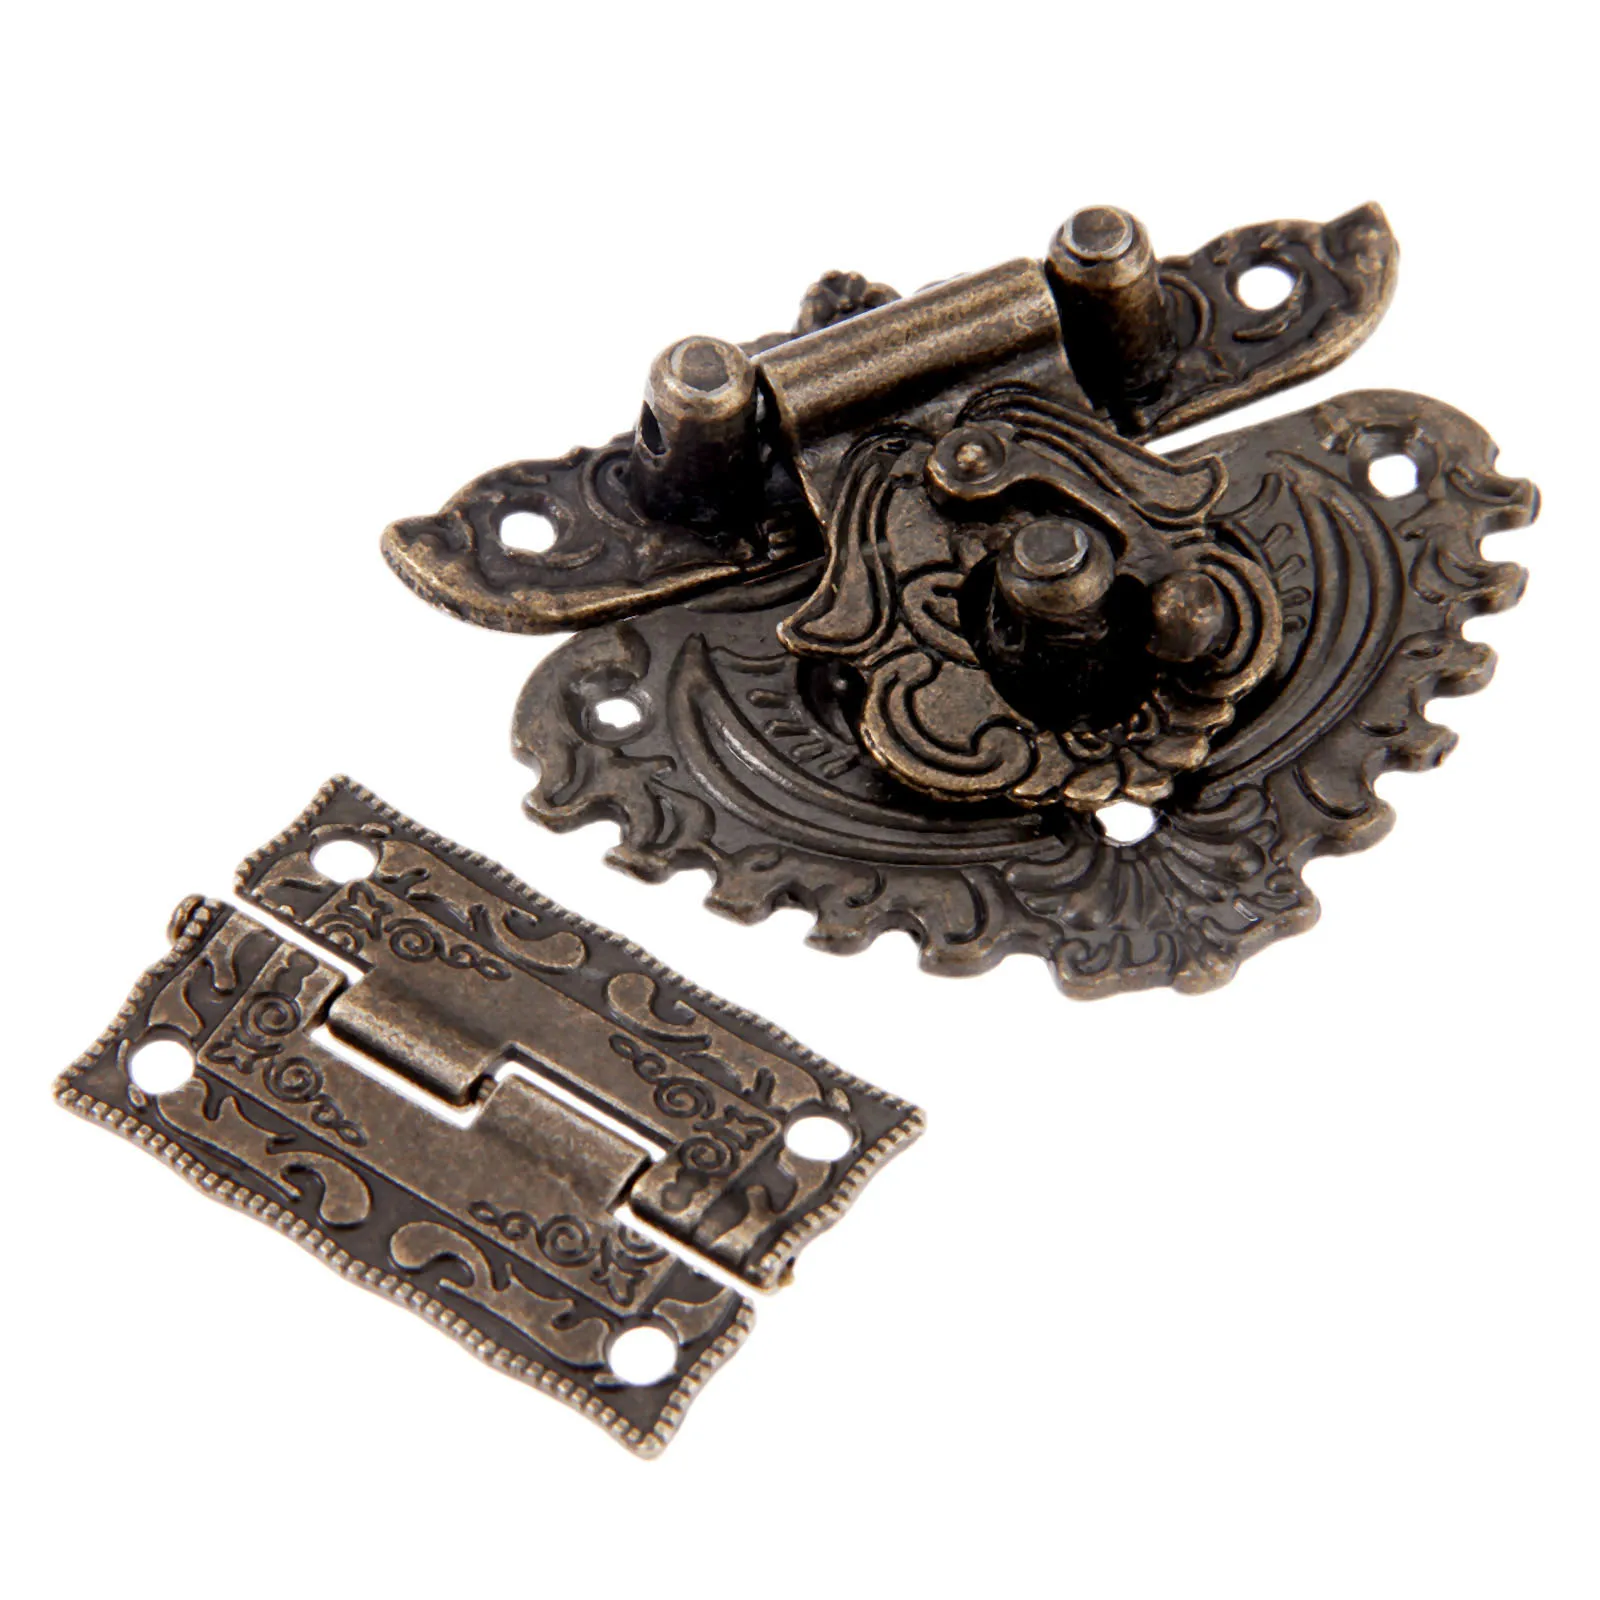 DRELD Antique Bronze Furniture Hardware Box Latch Hasp Toggle Buckle + 2Pcs Decorative Cabinet Hinges for Jewelry Wooden Box